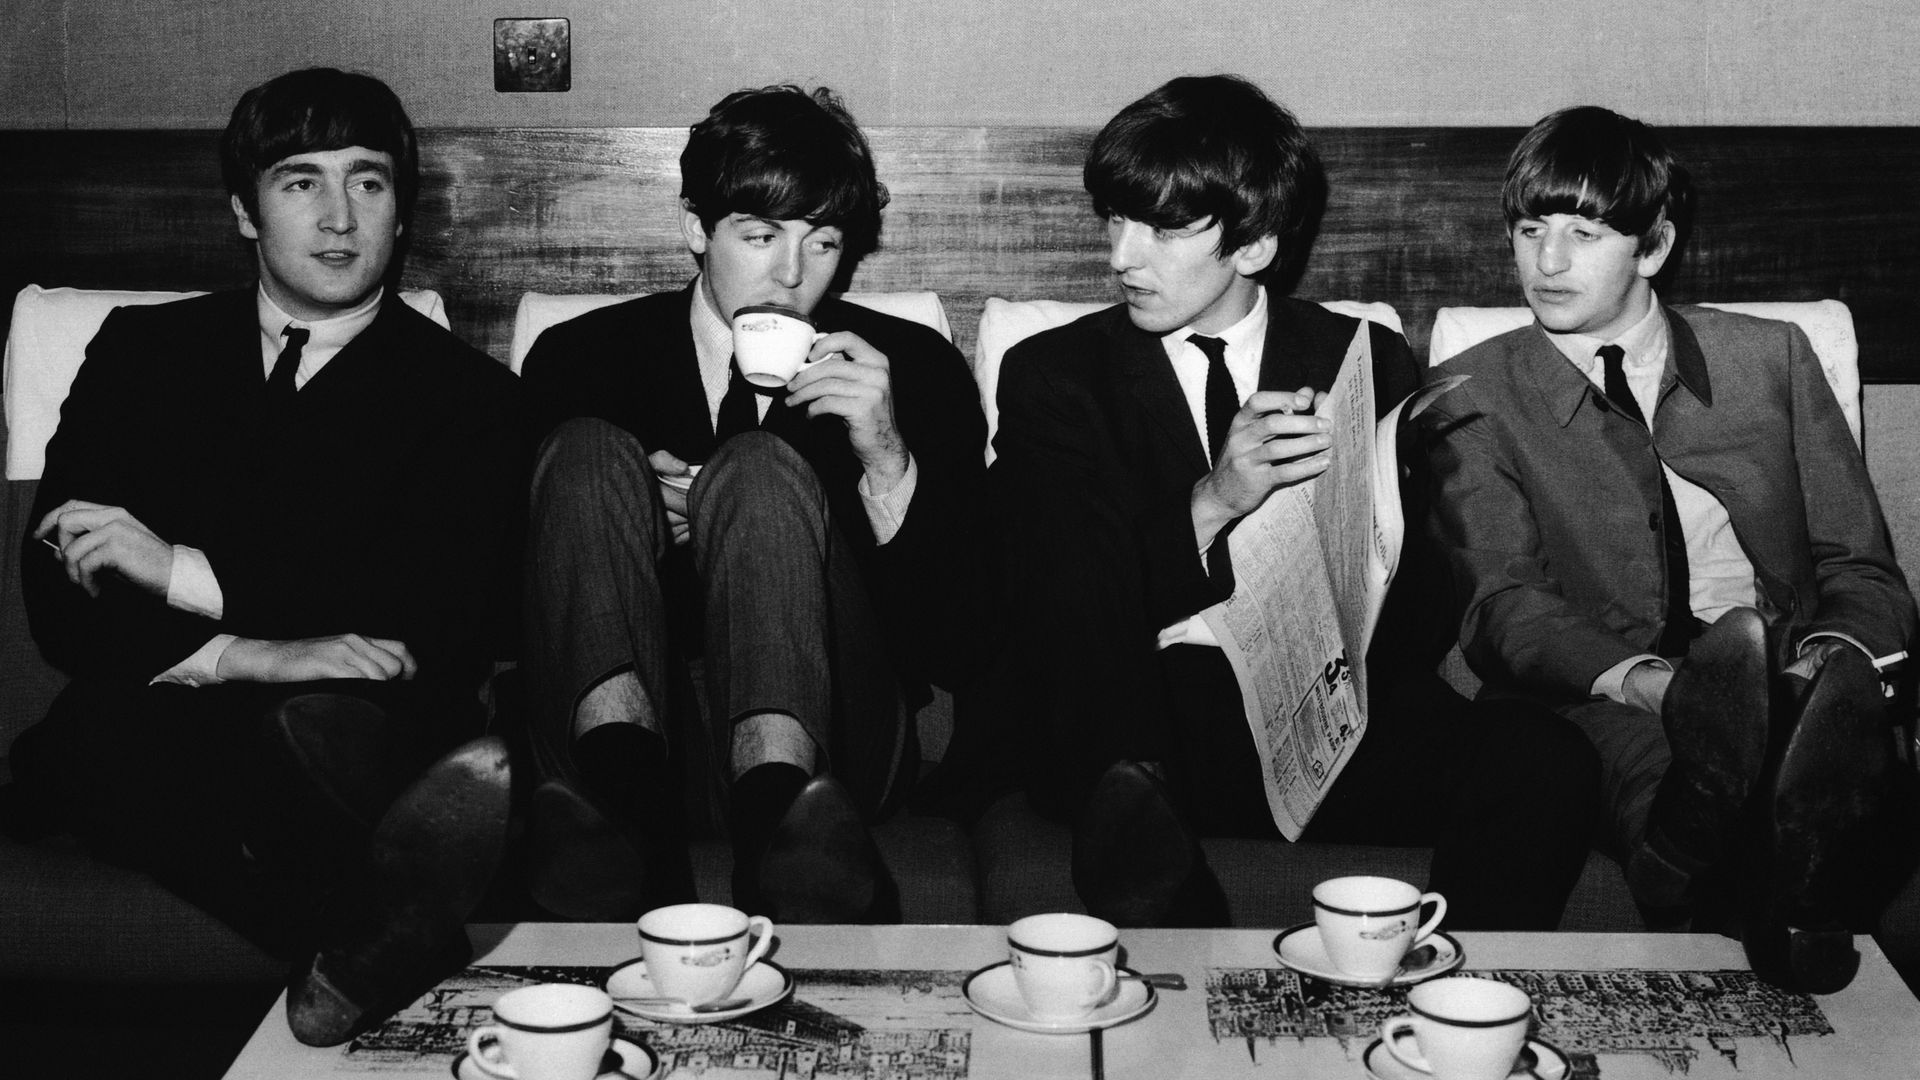 Black and white image of The Beatles on a couch, drinking out of cups